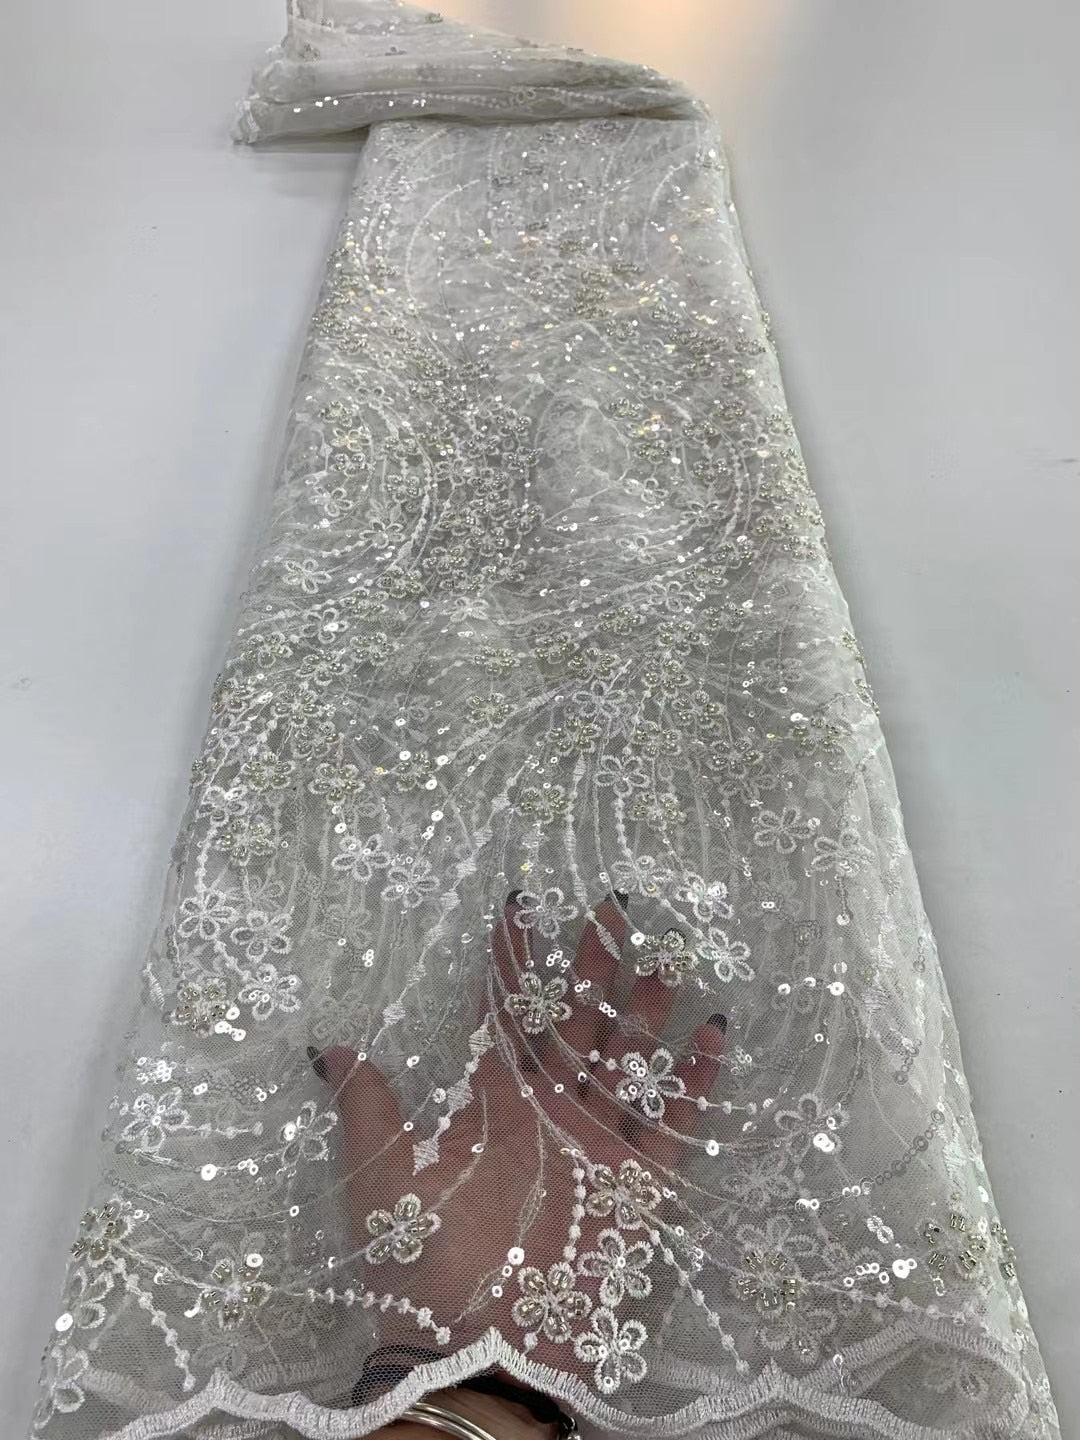 5 YARDS / 8 COLORS / Joelle Floral Beaded Glitter Embroidery Mesh Lace Wedding Party Prom Bridal Dress Fabric